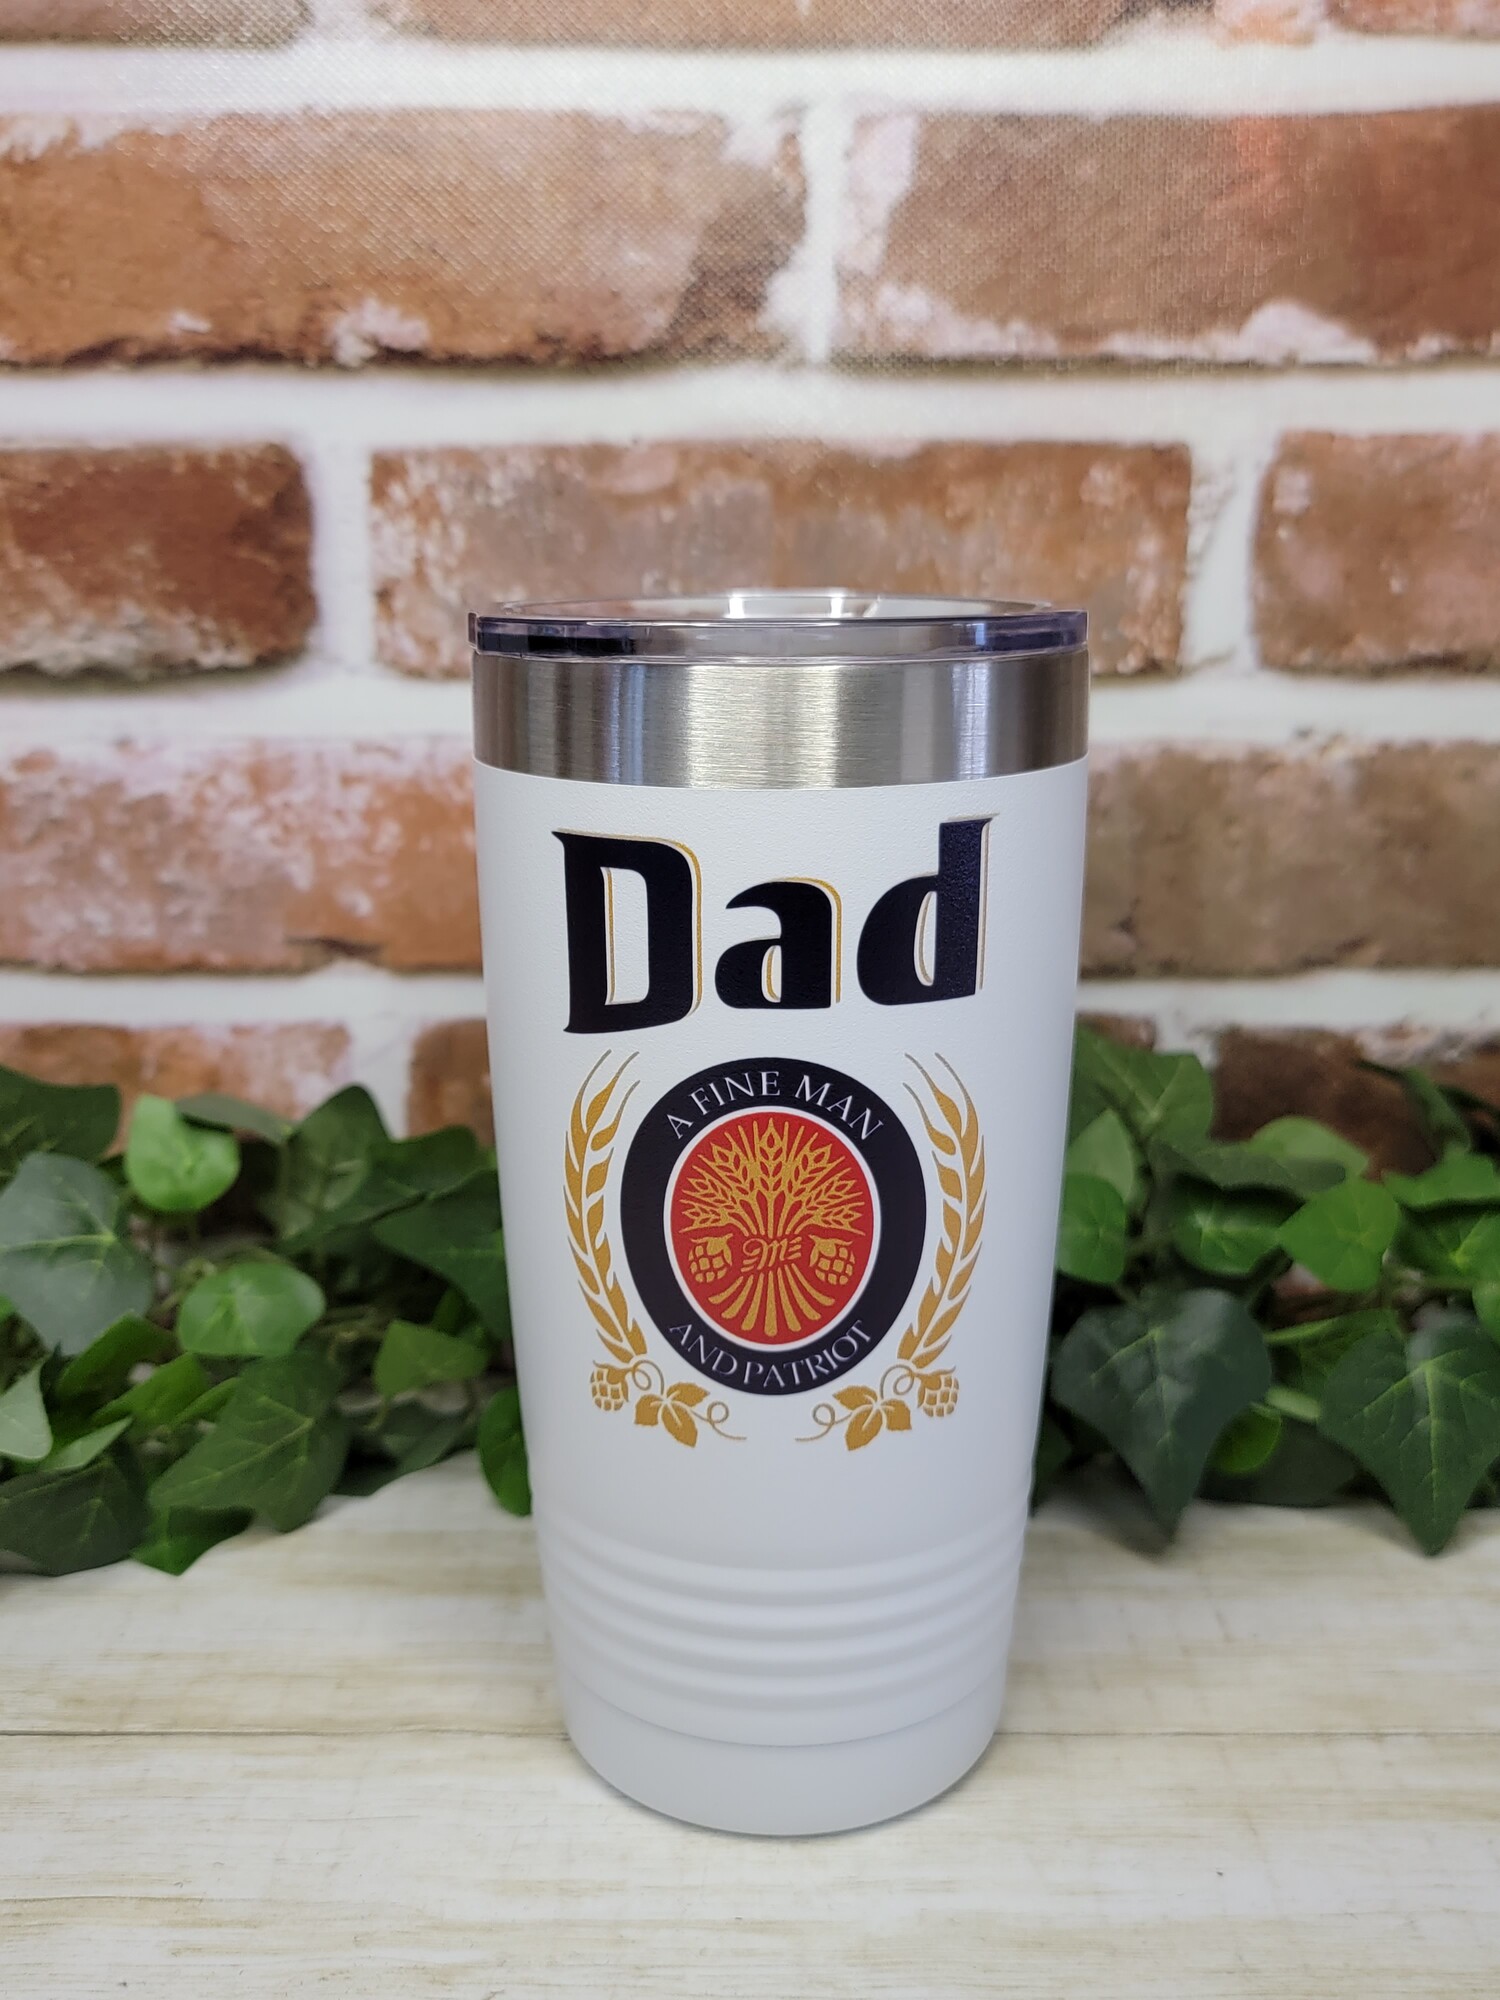 Dad will love his new custom tumbler. Our tumblers are UV Printed with the image shown with Best Dad by Par.

Keep your drinks ice cold longer and it is great for hot beverages. The clear lid even allows for use of straws!- Double wall 18/8 stainless steel construction

- Features copper insulation that keeps drinks HOT for 8 hours and COLD for 16 hours
- Tapered design that easily fits in cup holders
- Clear push-on lid
- No sweat Exterior
- Hand wash recommended

We UV Print the cups; so there is no worries of a vinyl decal peeling or coming off.